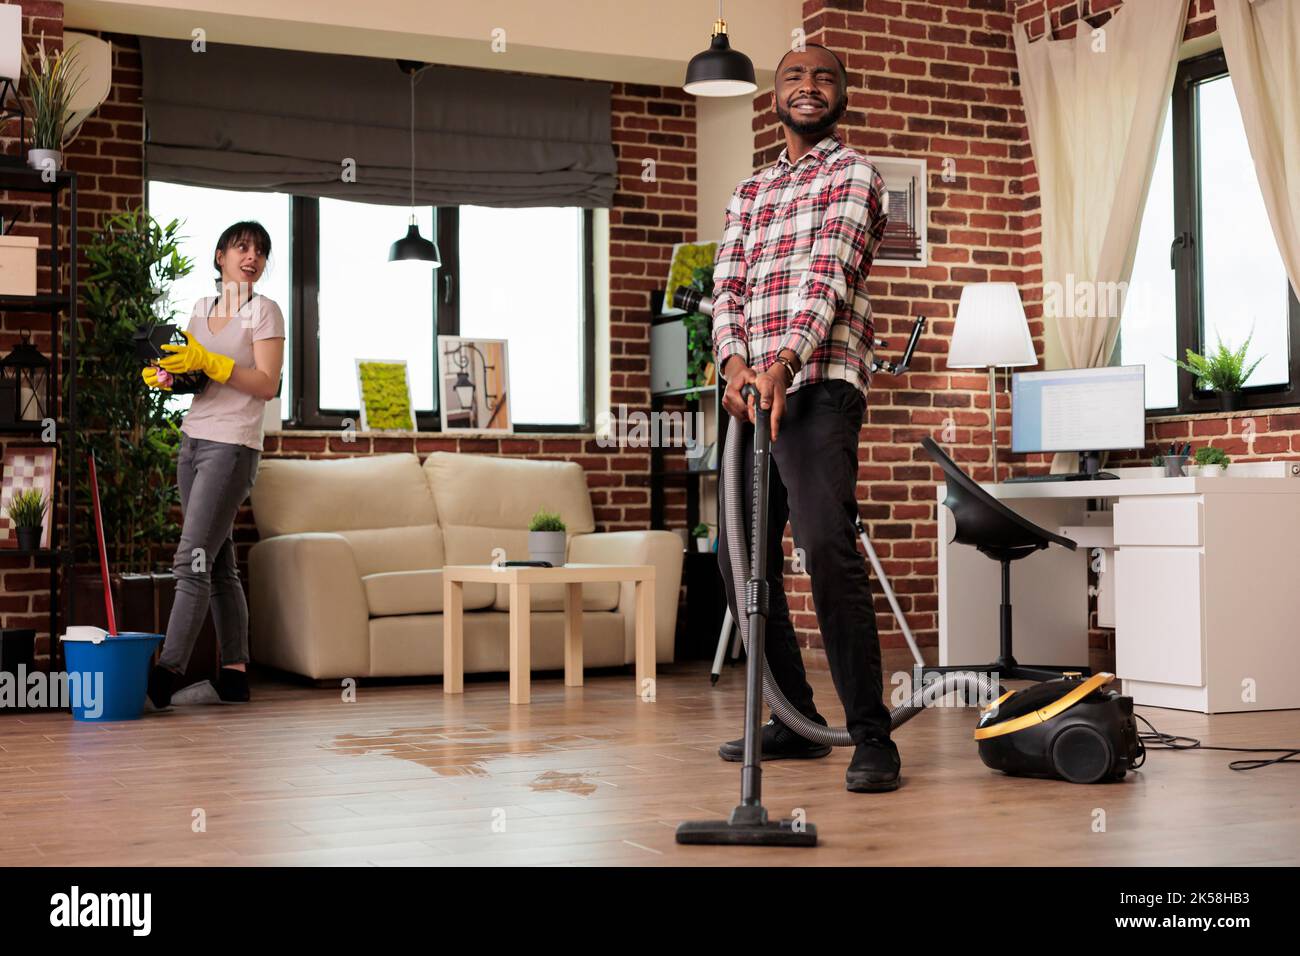 Multiracial couple happily cleaning at home, african american man vacuuming the whole place while woman dusts the shelves. Working as a team to keep house clean and tidy. Stock Photo